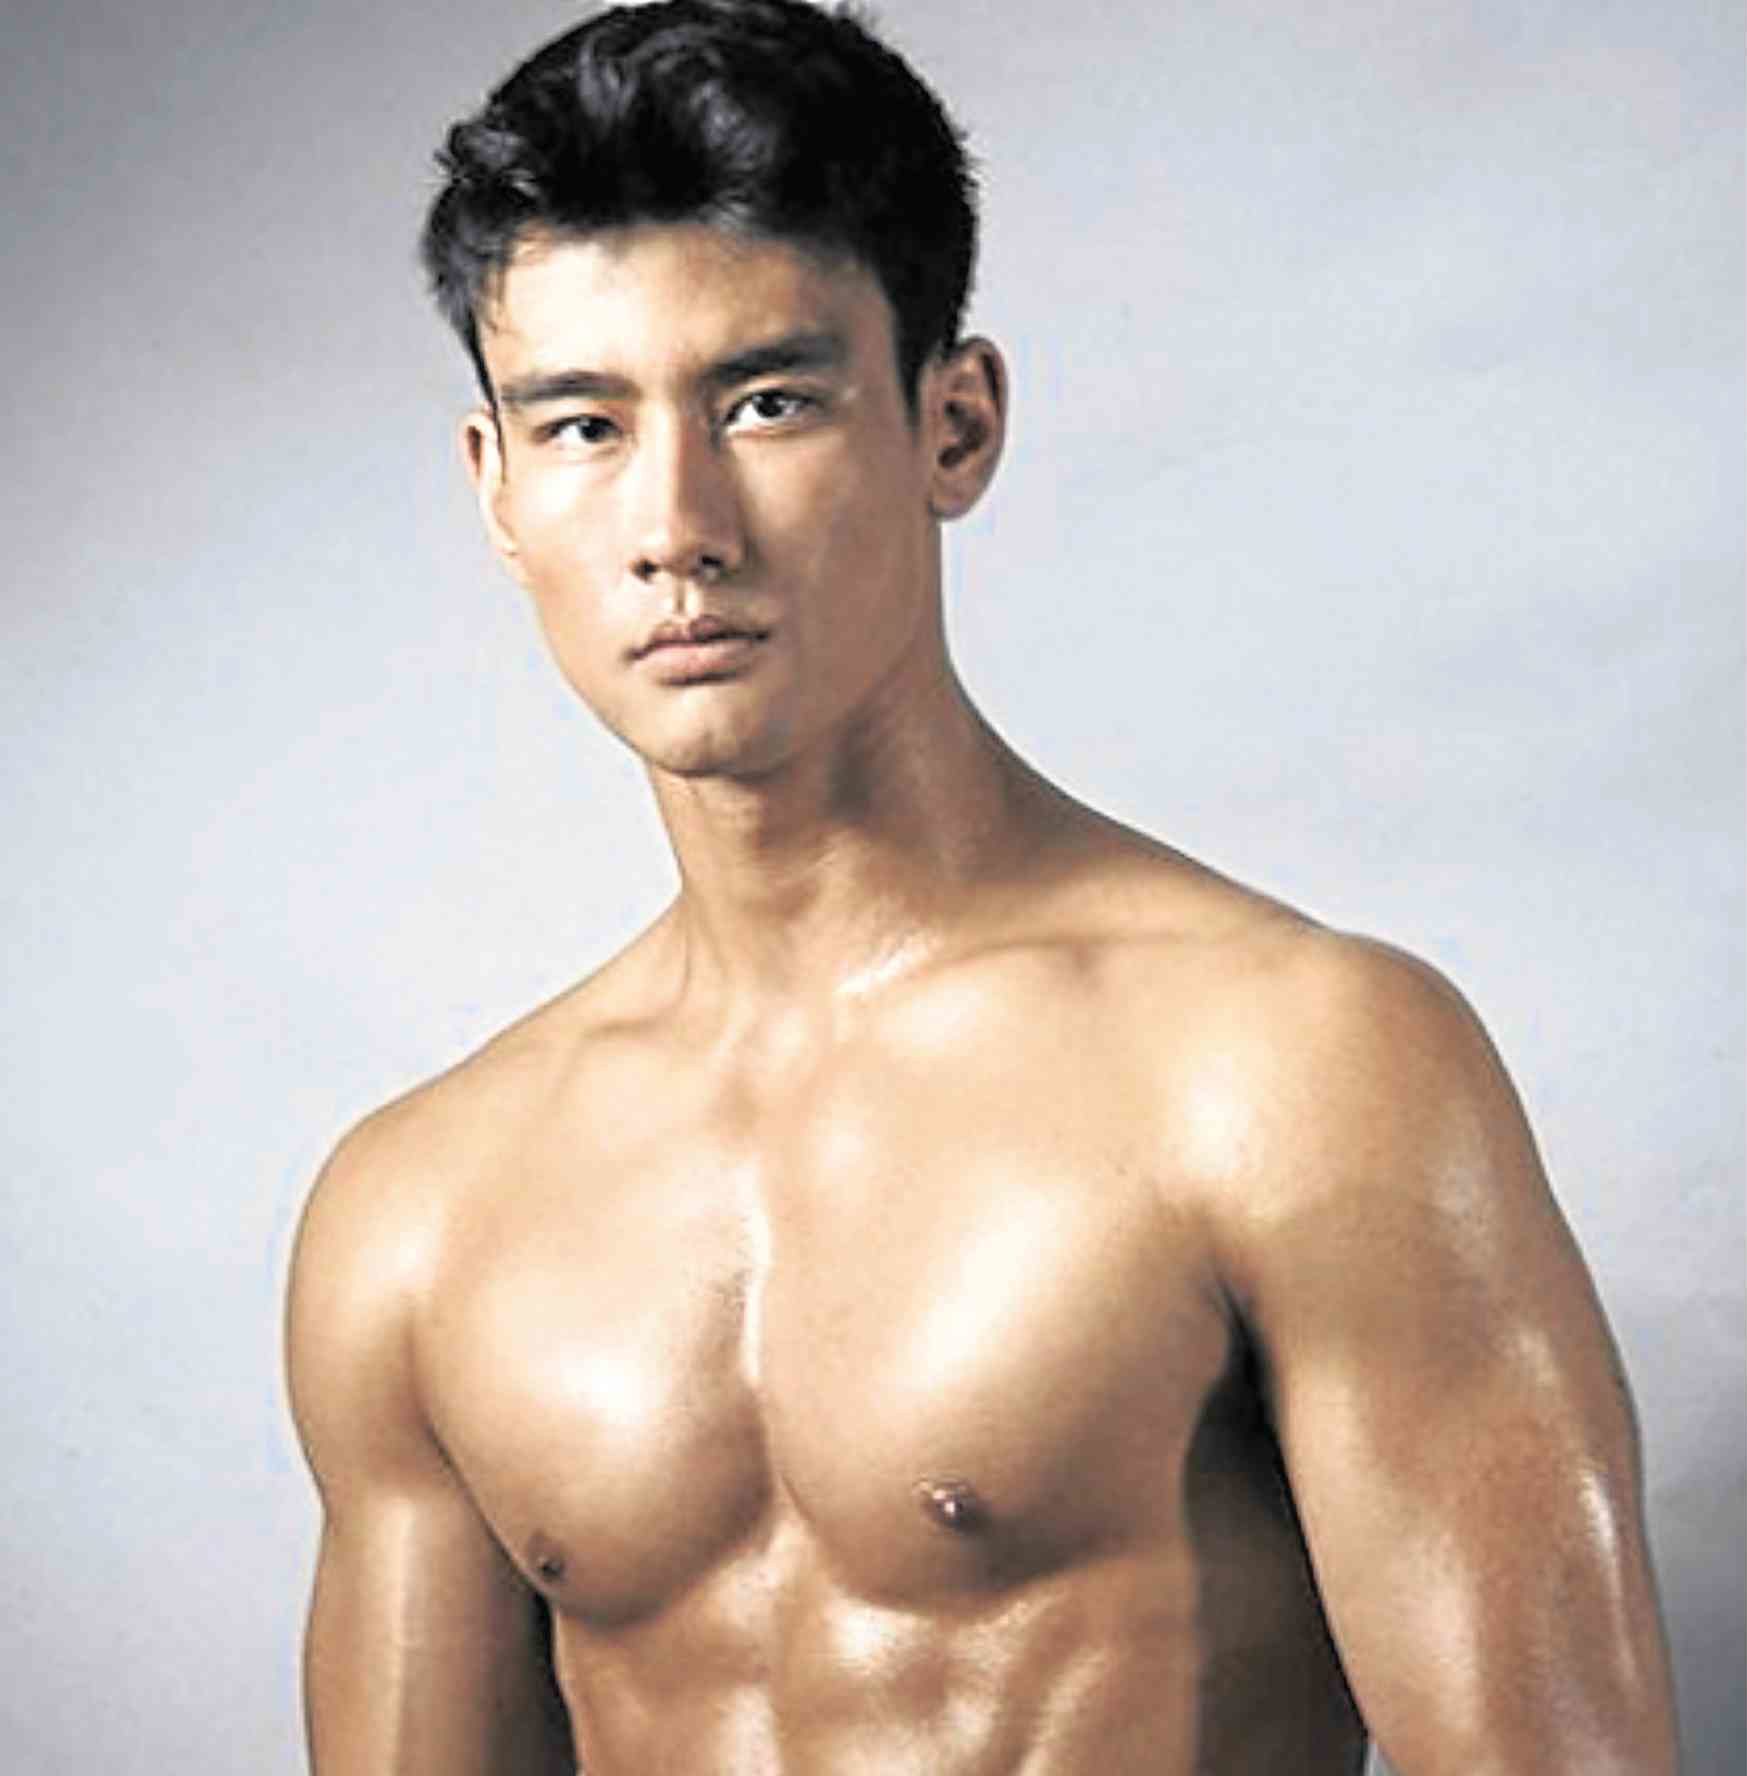 Perseverance finally pays off for Alex Landi | Inquirer Entertainment